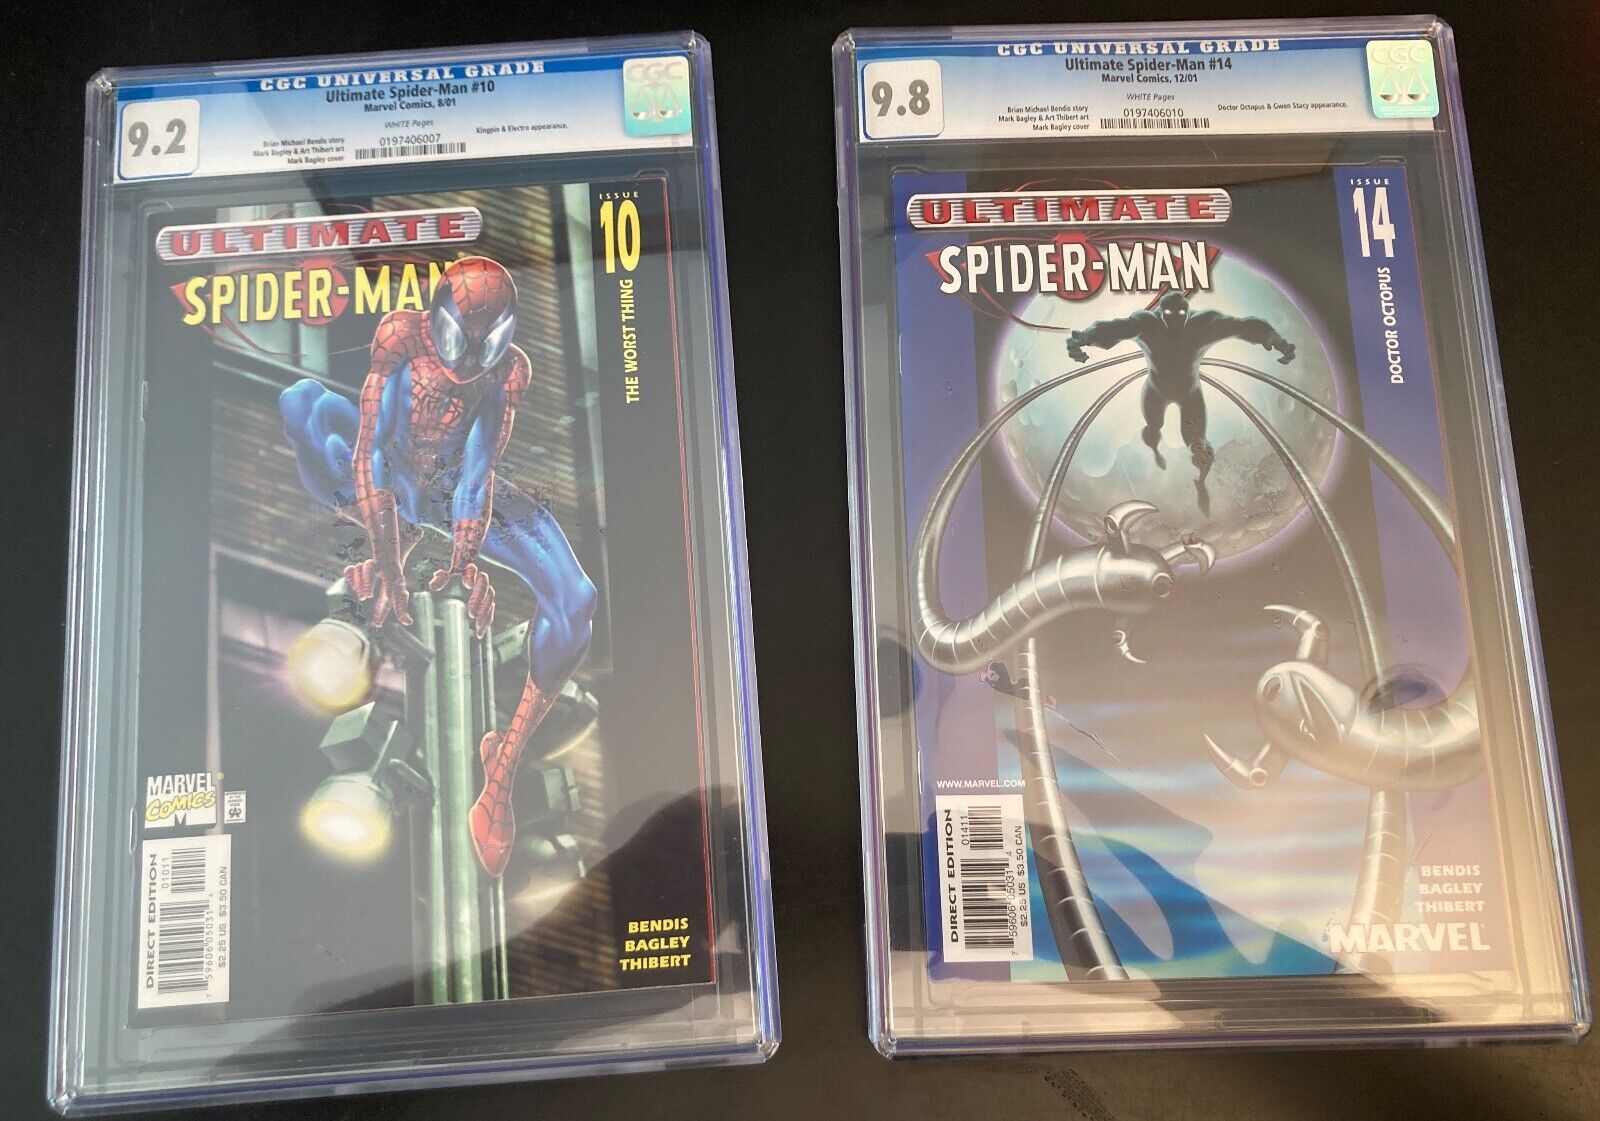 Wowza Lot of 2 **HIGH-GRADE CGC** ULTIMATE SPIDER-MAN #10 *9.2* + #14 *9.8*